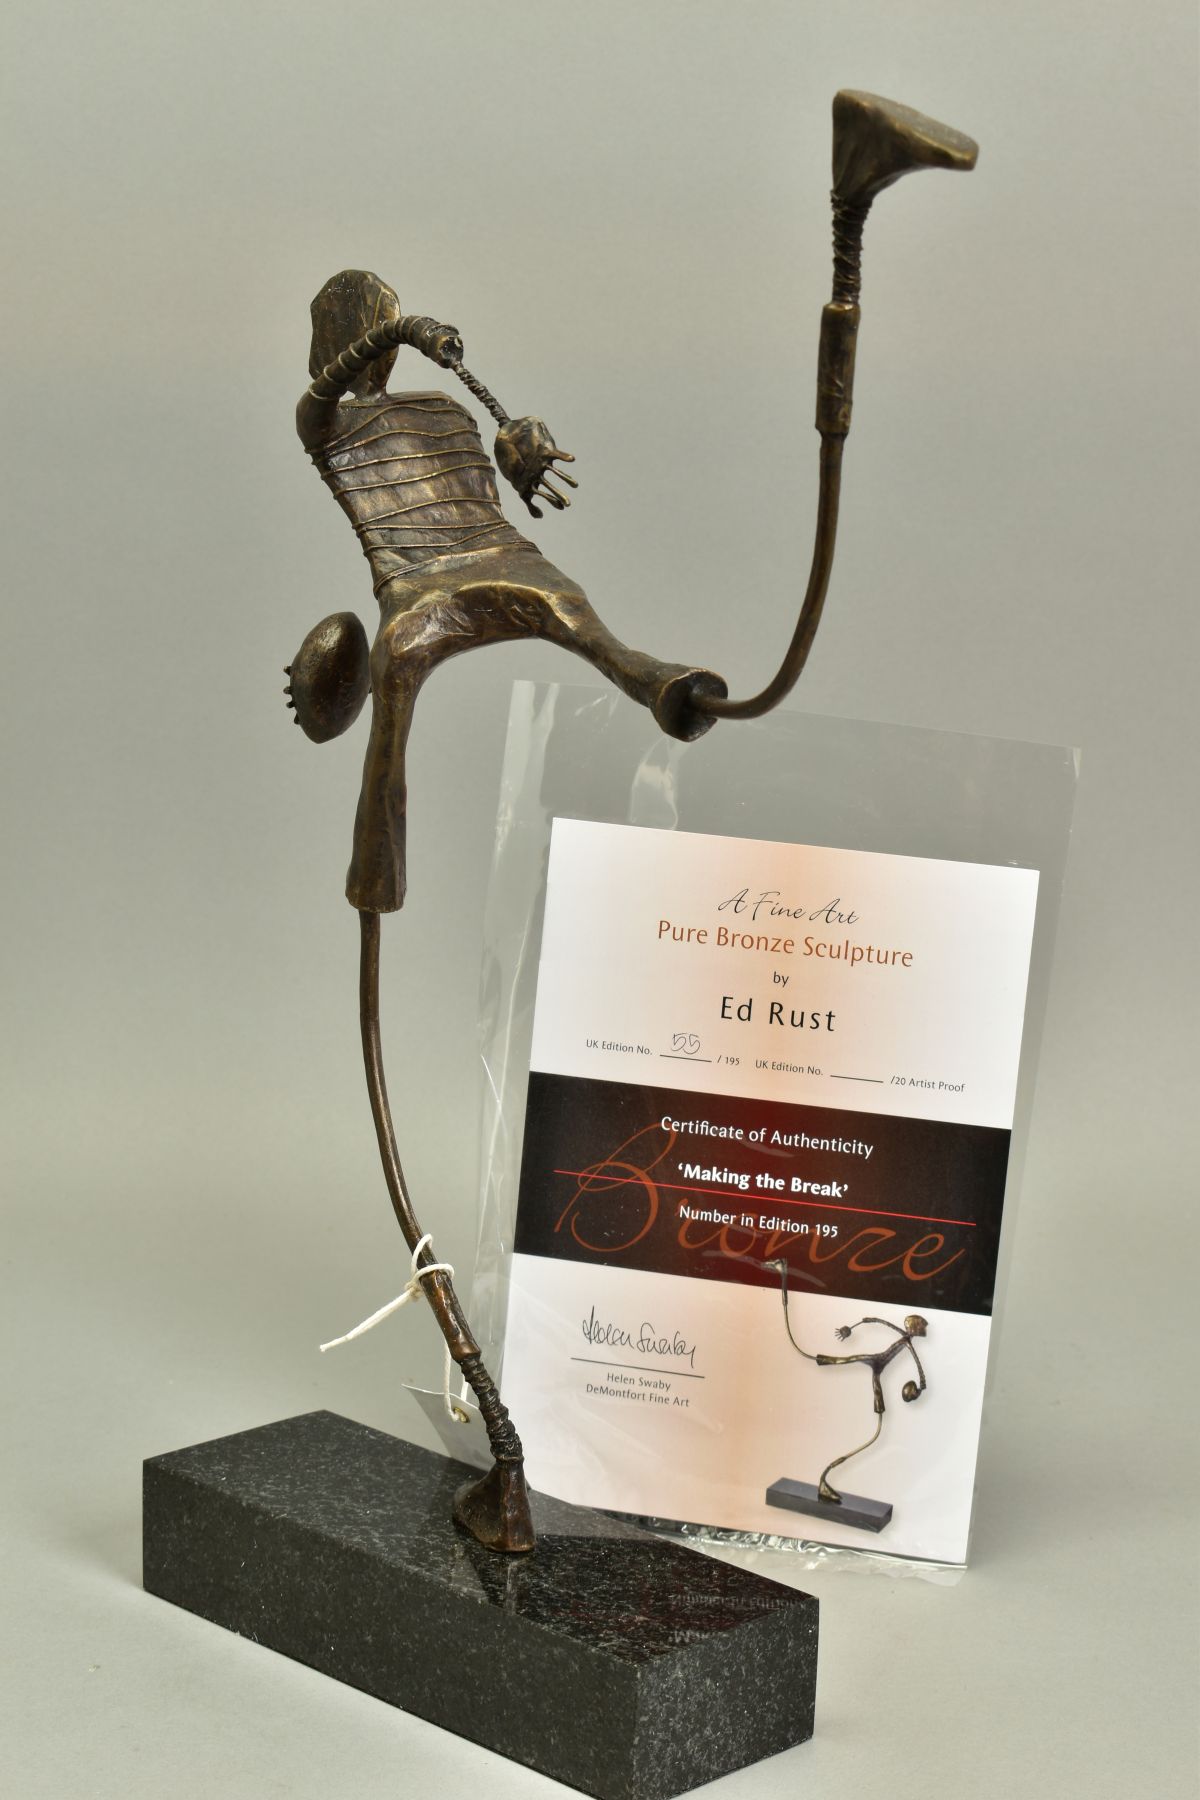 ED RUST (BRITISH CONTEMPORARY), 'Making The Break', a Limited Edition bronze sculpture of a figure - Image 4 of 5